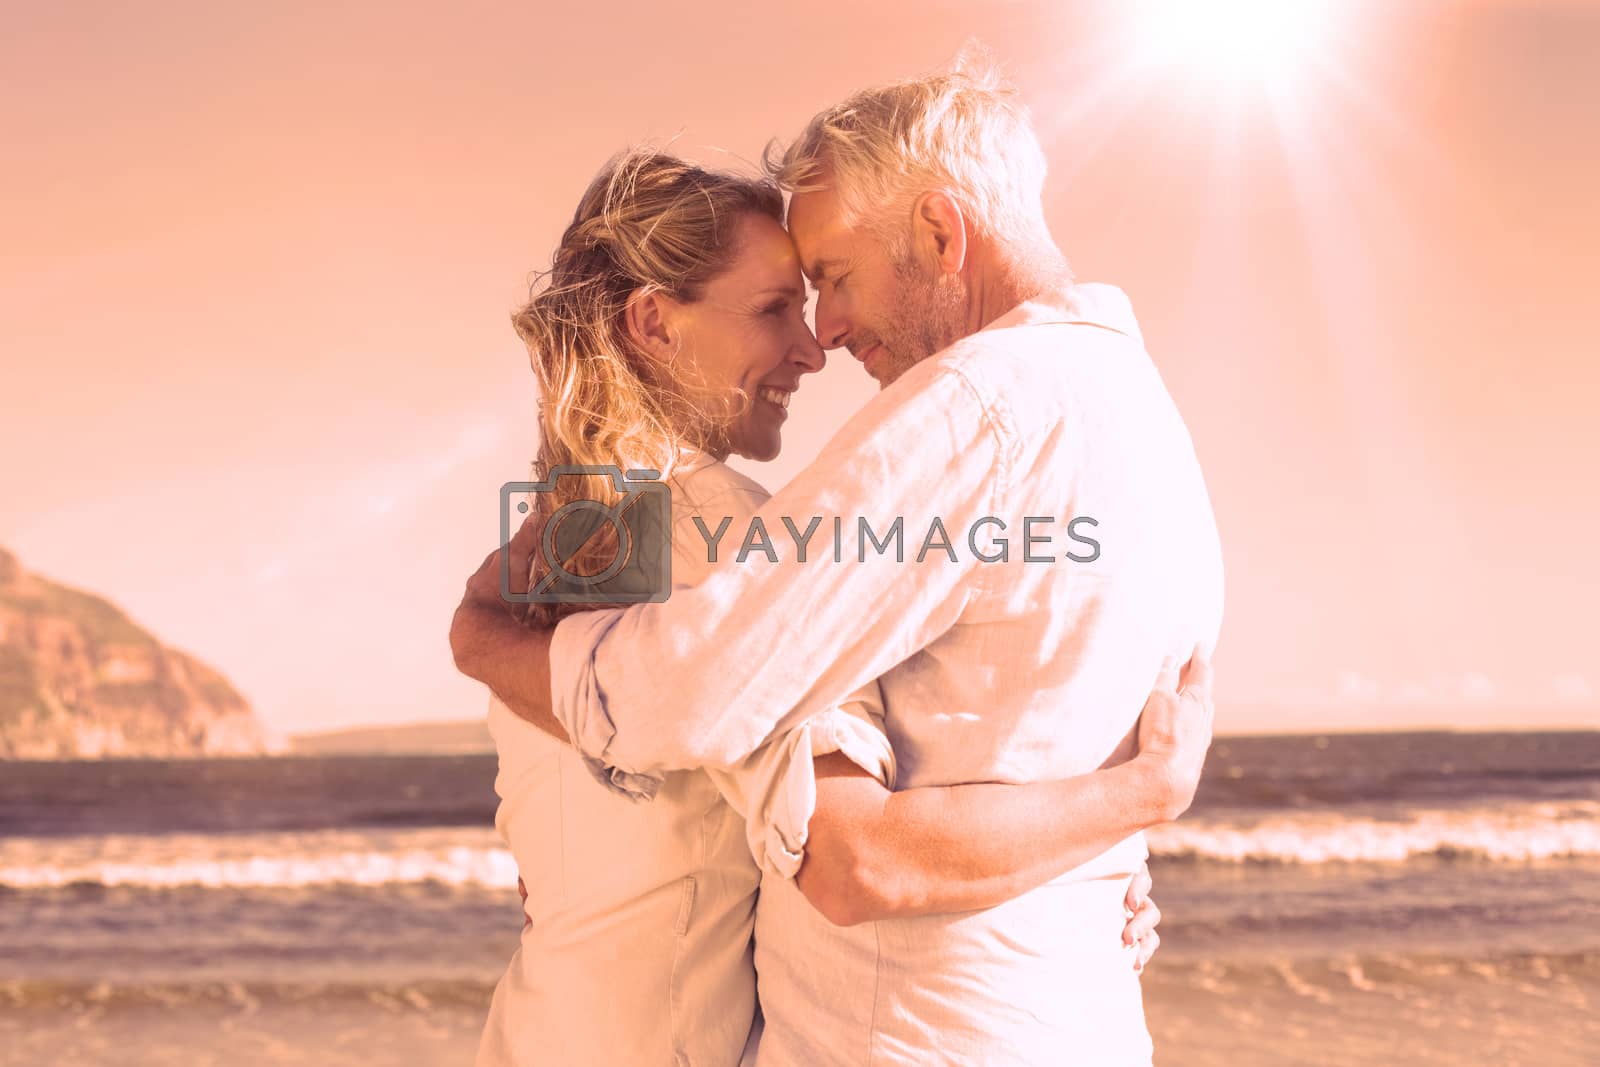 Royalty free image of Happy couple on the beach touching faces by Wavebreakmedia